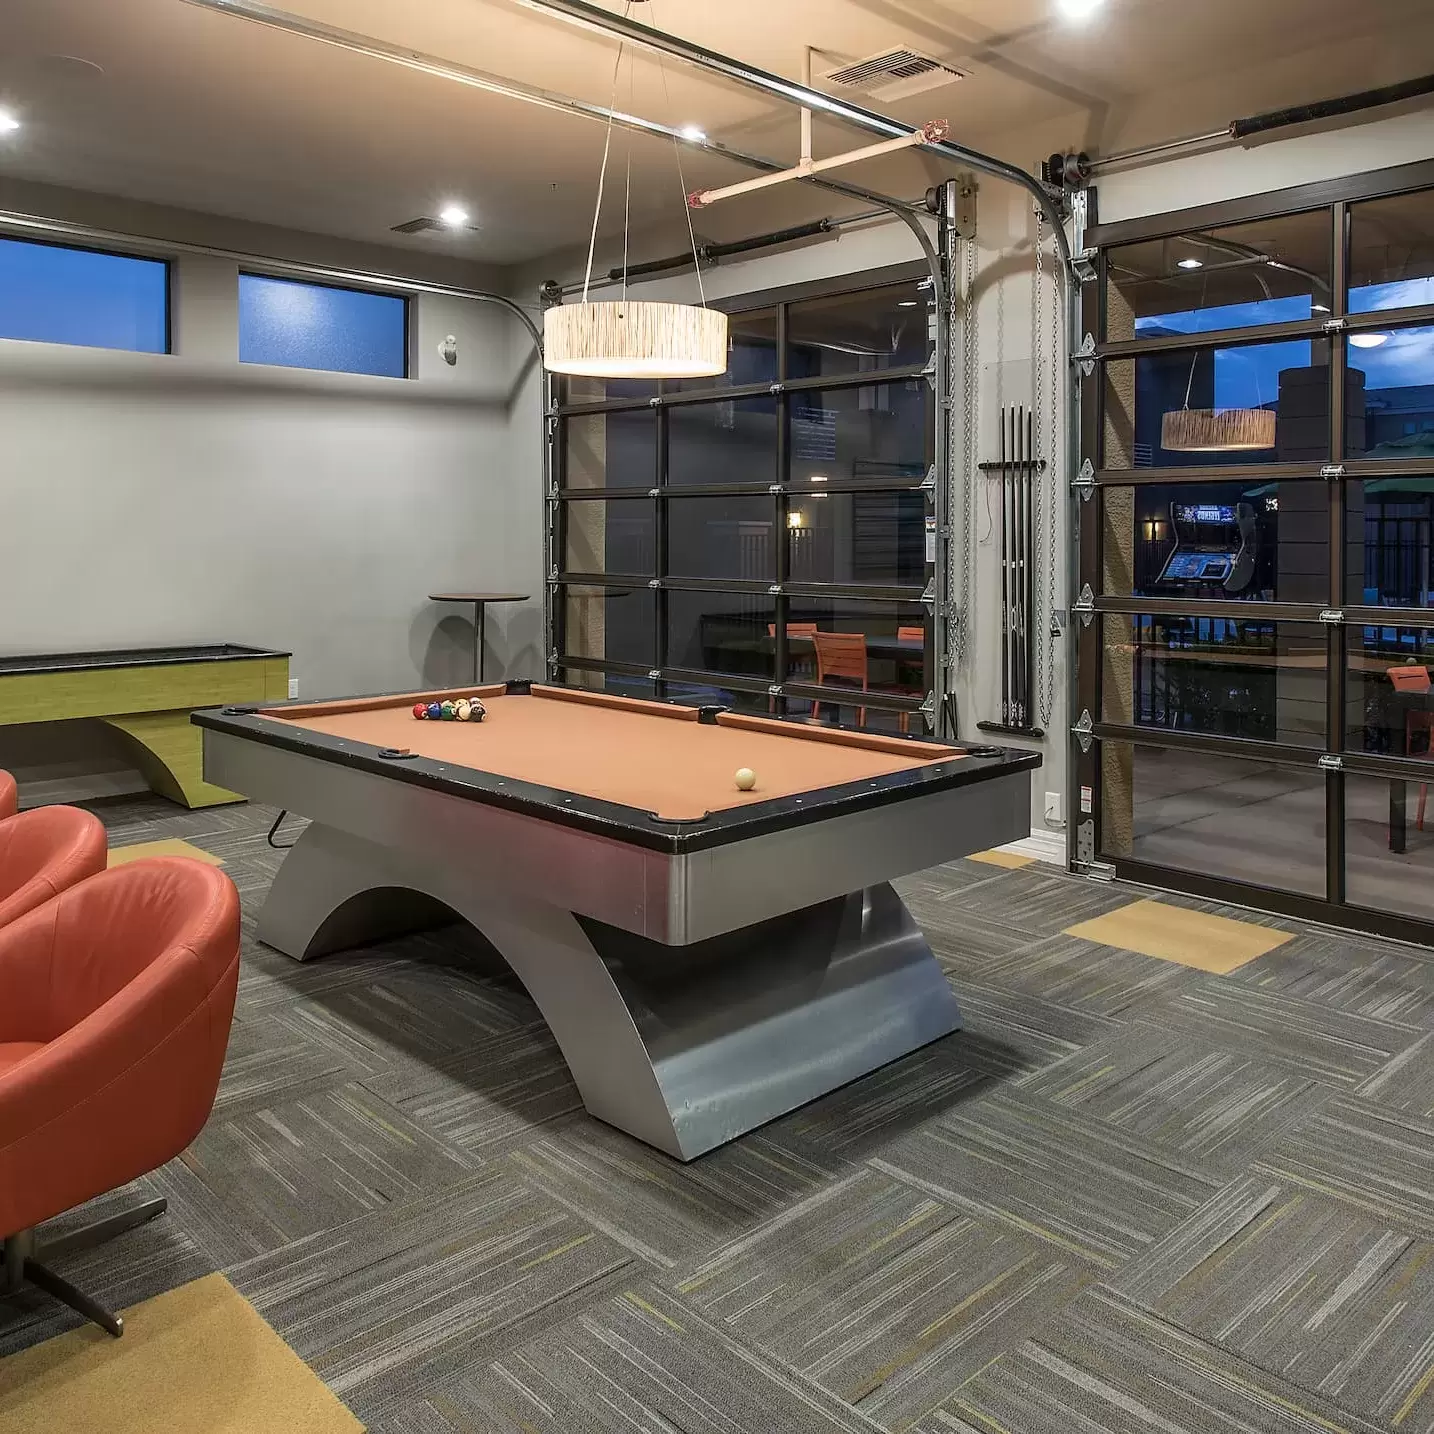 The pool table in the Resident Hub at Liv Northgate luxury apartments.